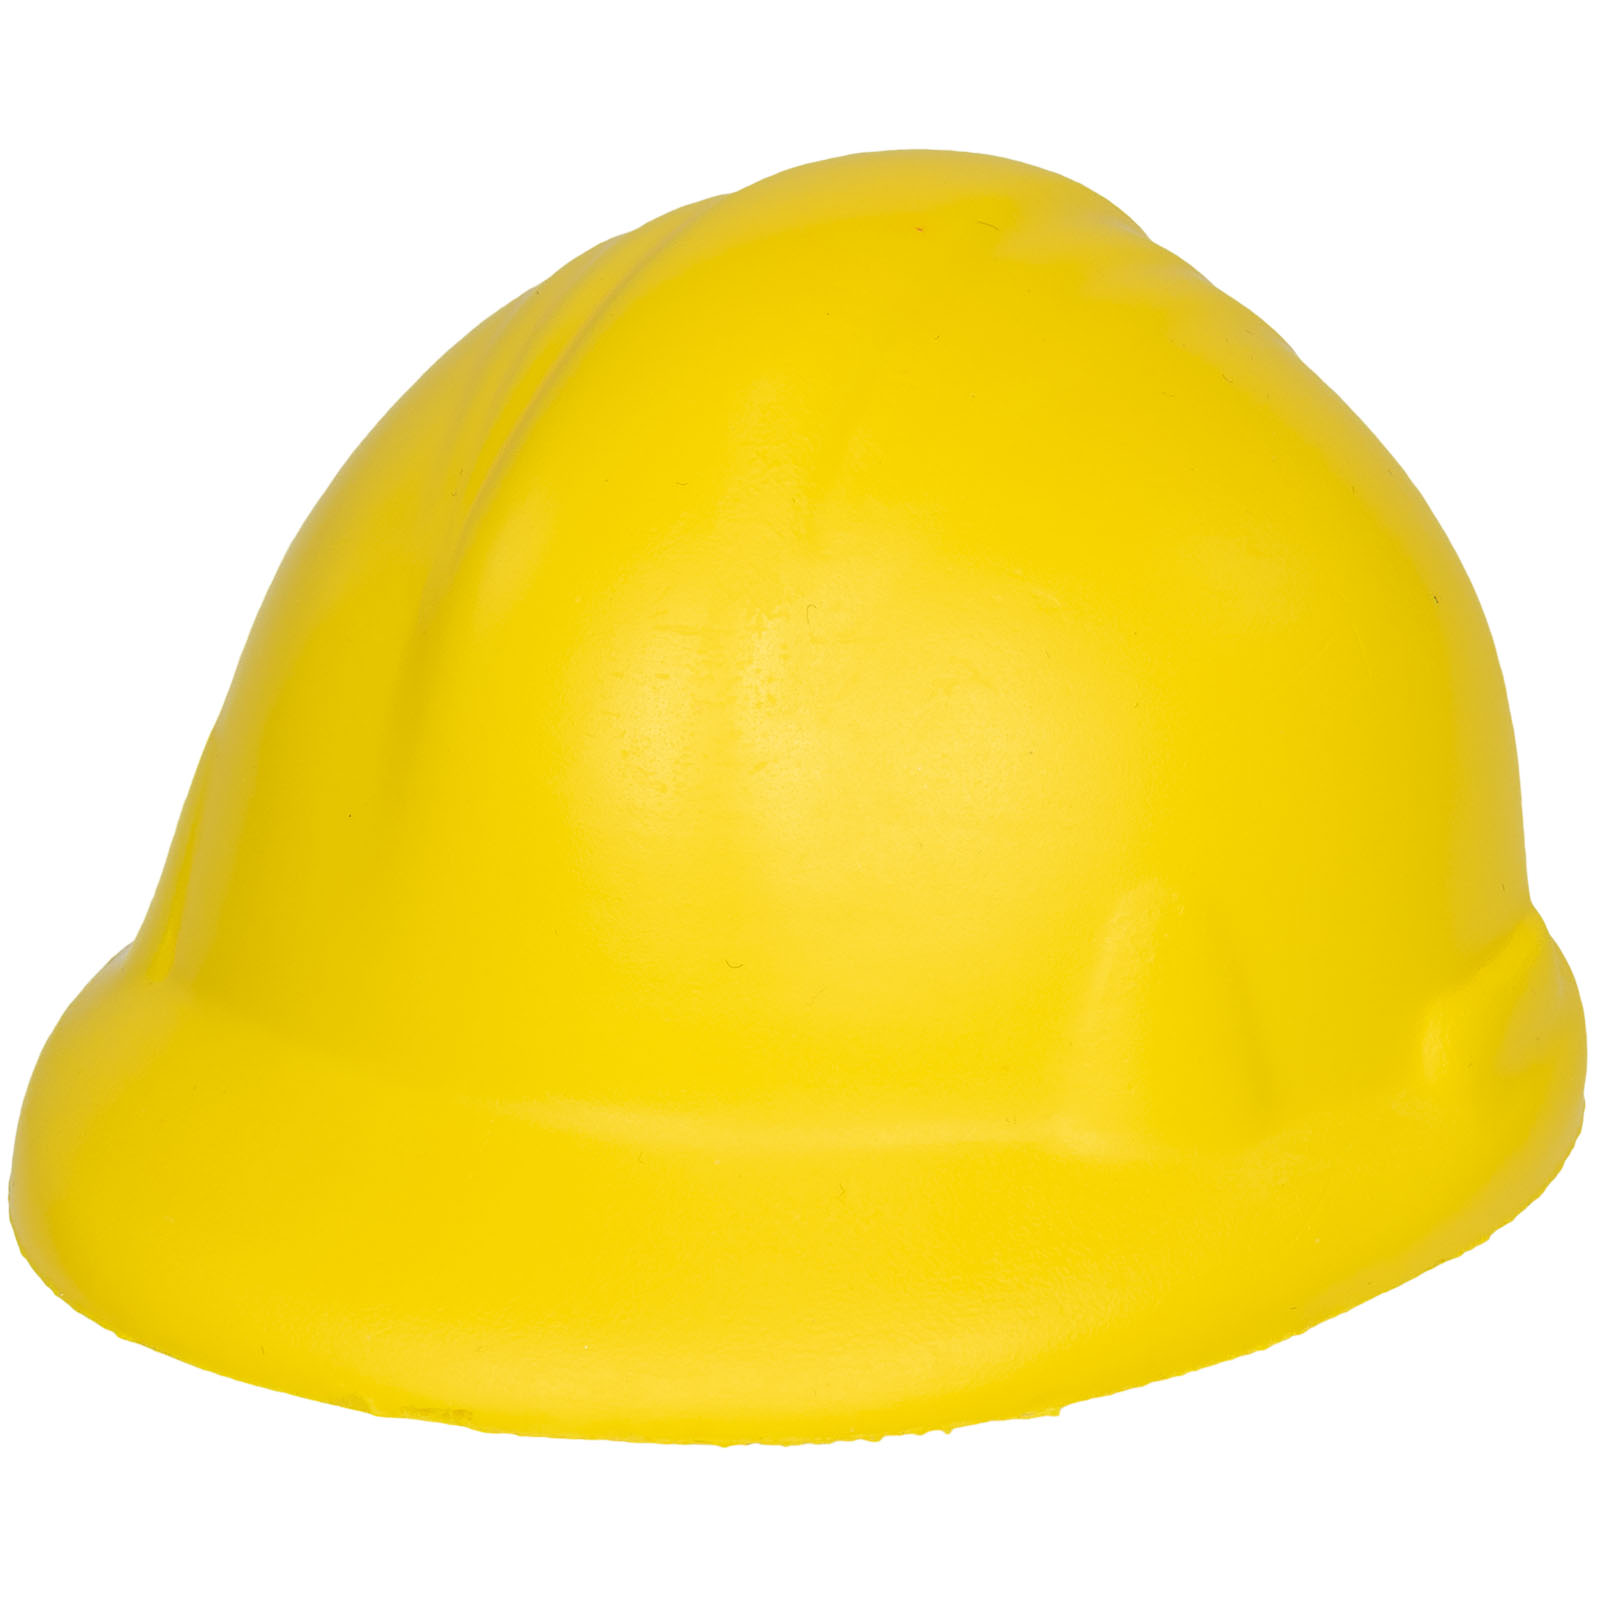 Construction Worker Hard Hat Stress Toy - Goring-by-Sea